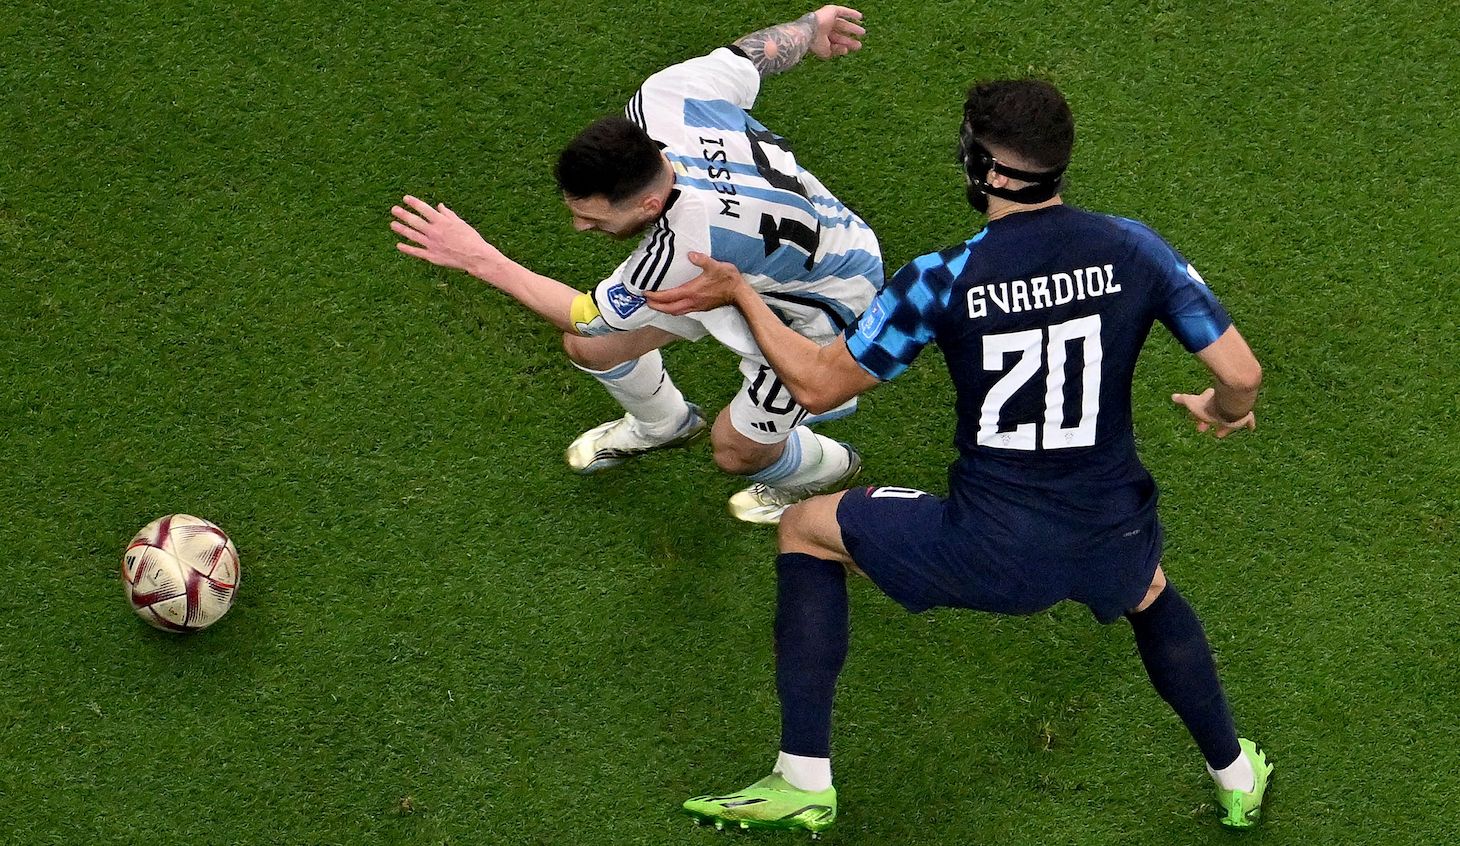 Argentina's forward #10 Lionel Messi outpasses Croatia's defender #20 Josko Gvardiol during the Qatar 2022 World Cup football semi-final match between Argentina and Croatia at Lusail Stadium in Lusail, north of Doha on December 13, 2022.